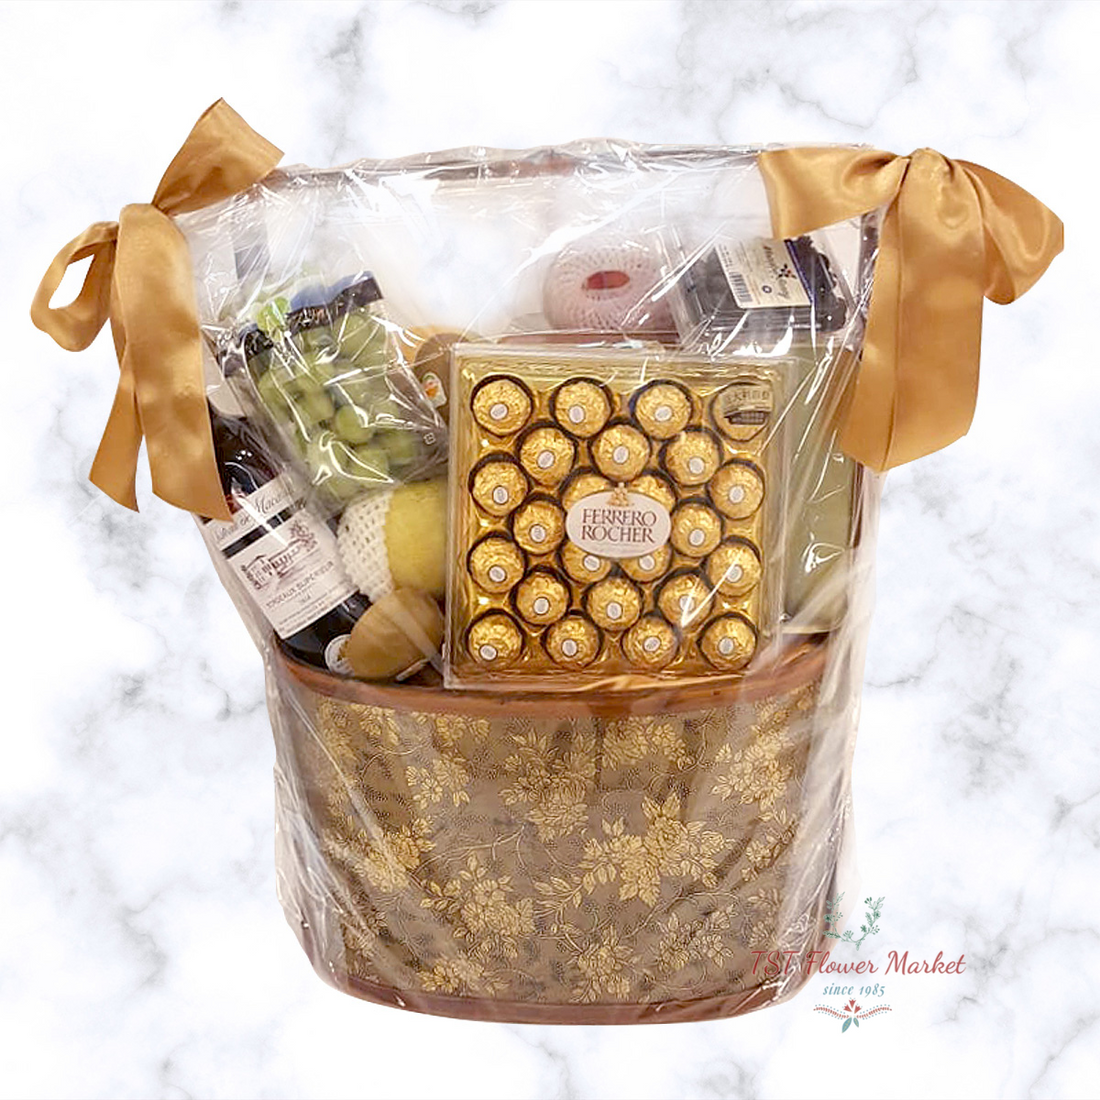 Mid Autumn Hamper 中秋節果籃A16-This hamper is packed with chocolate snack, a bottle of wine, and some different kinds of fruits.-TST Flower Market